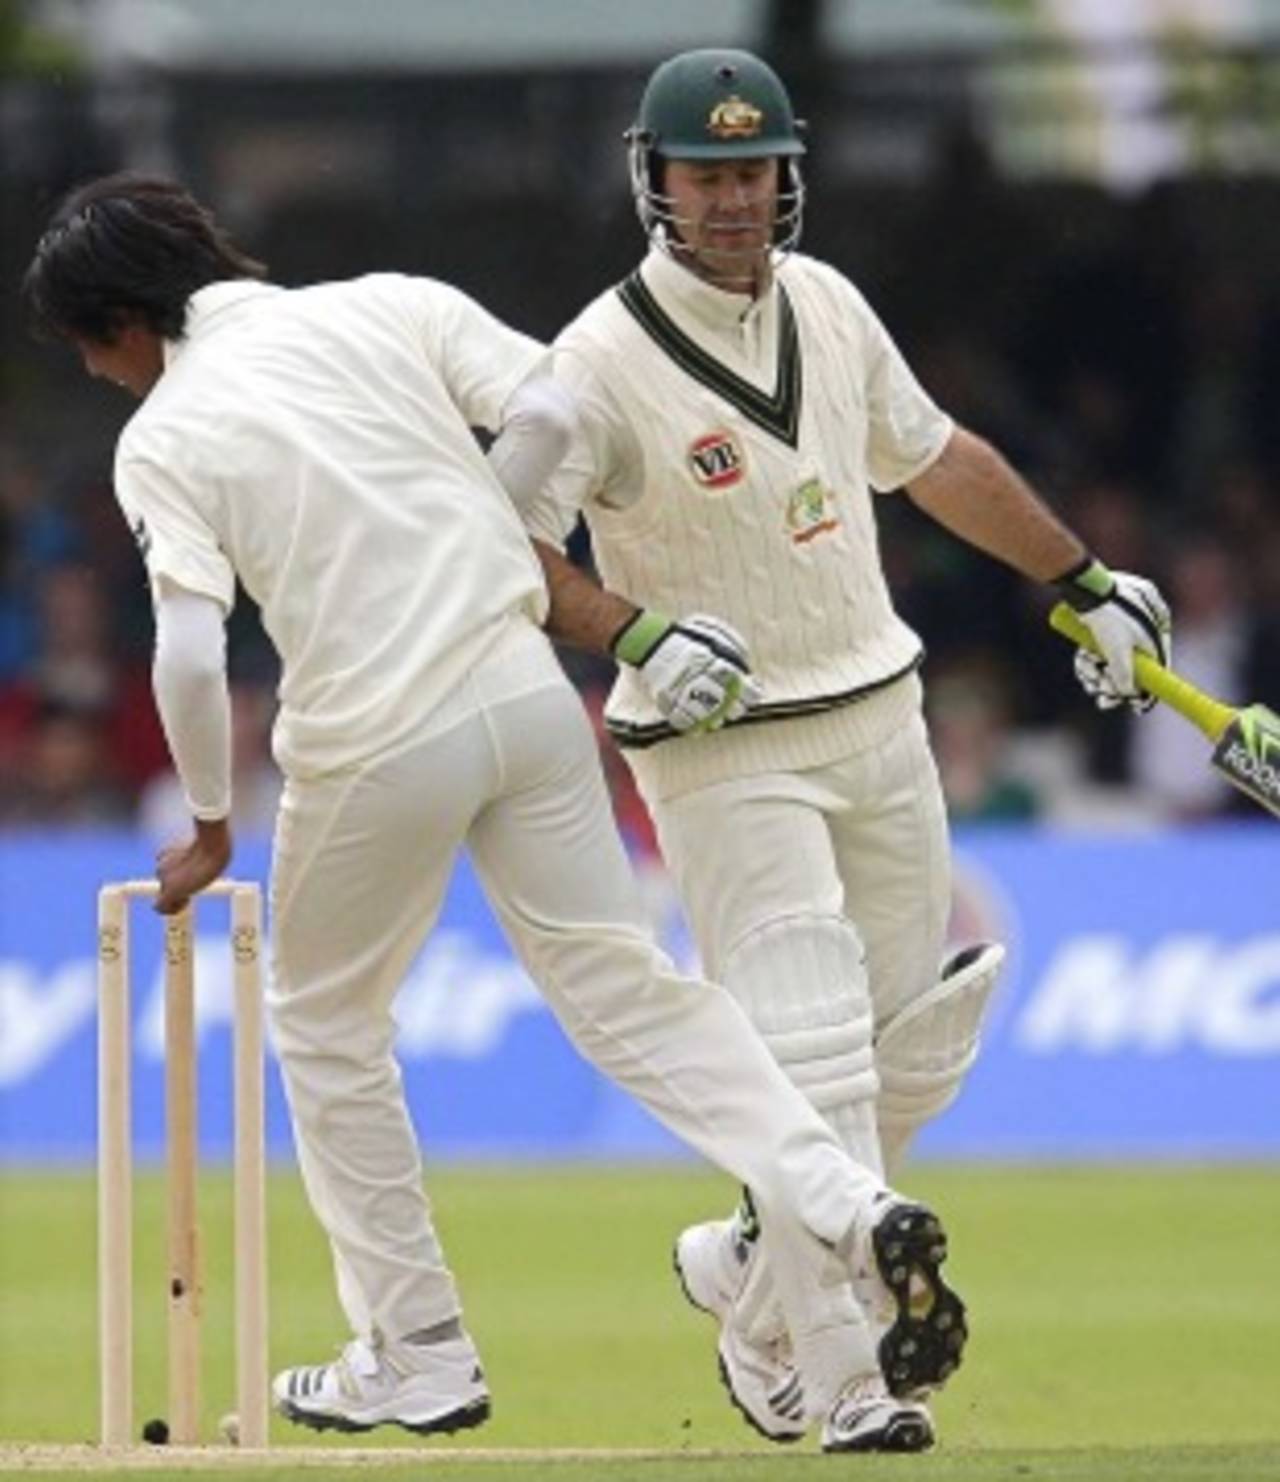 There was a clash of elbows between Ricky Ponting and Mohammad Aamer, Pakistan v Australia, 1st Test, Lord's, July 13, 2010